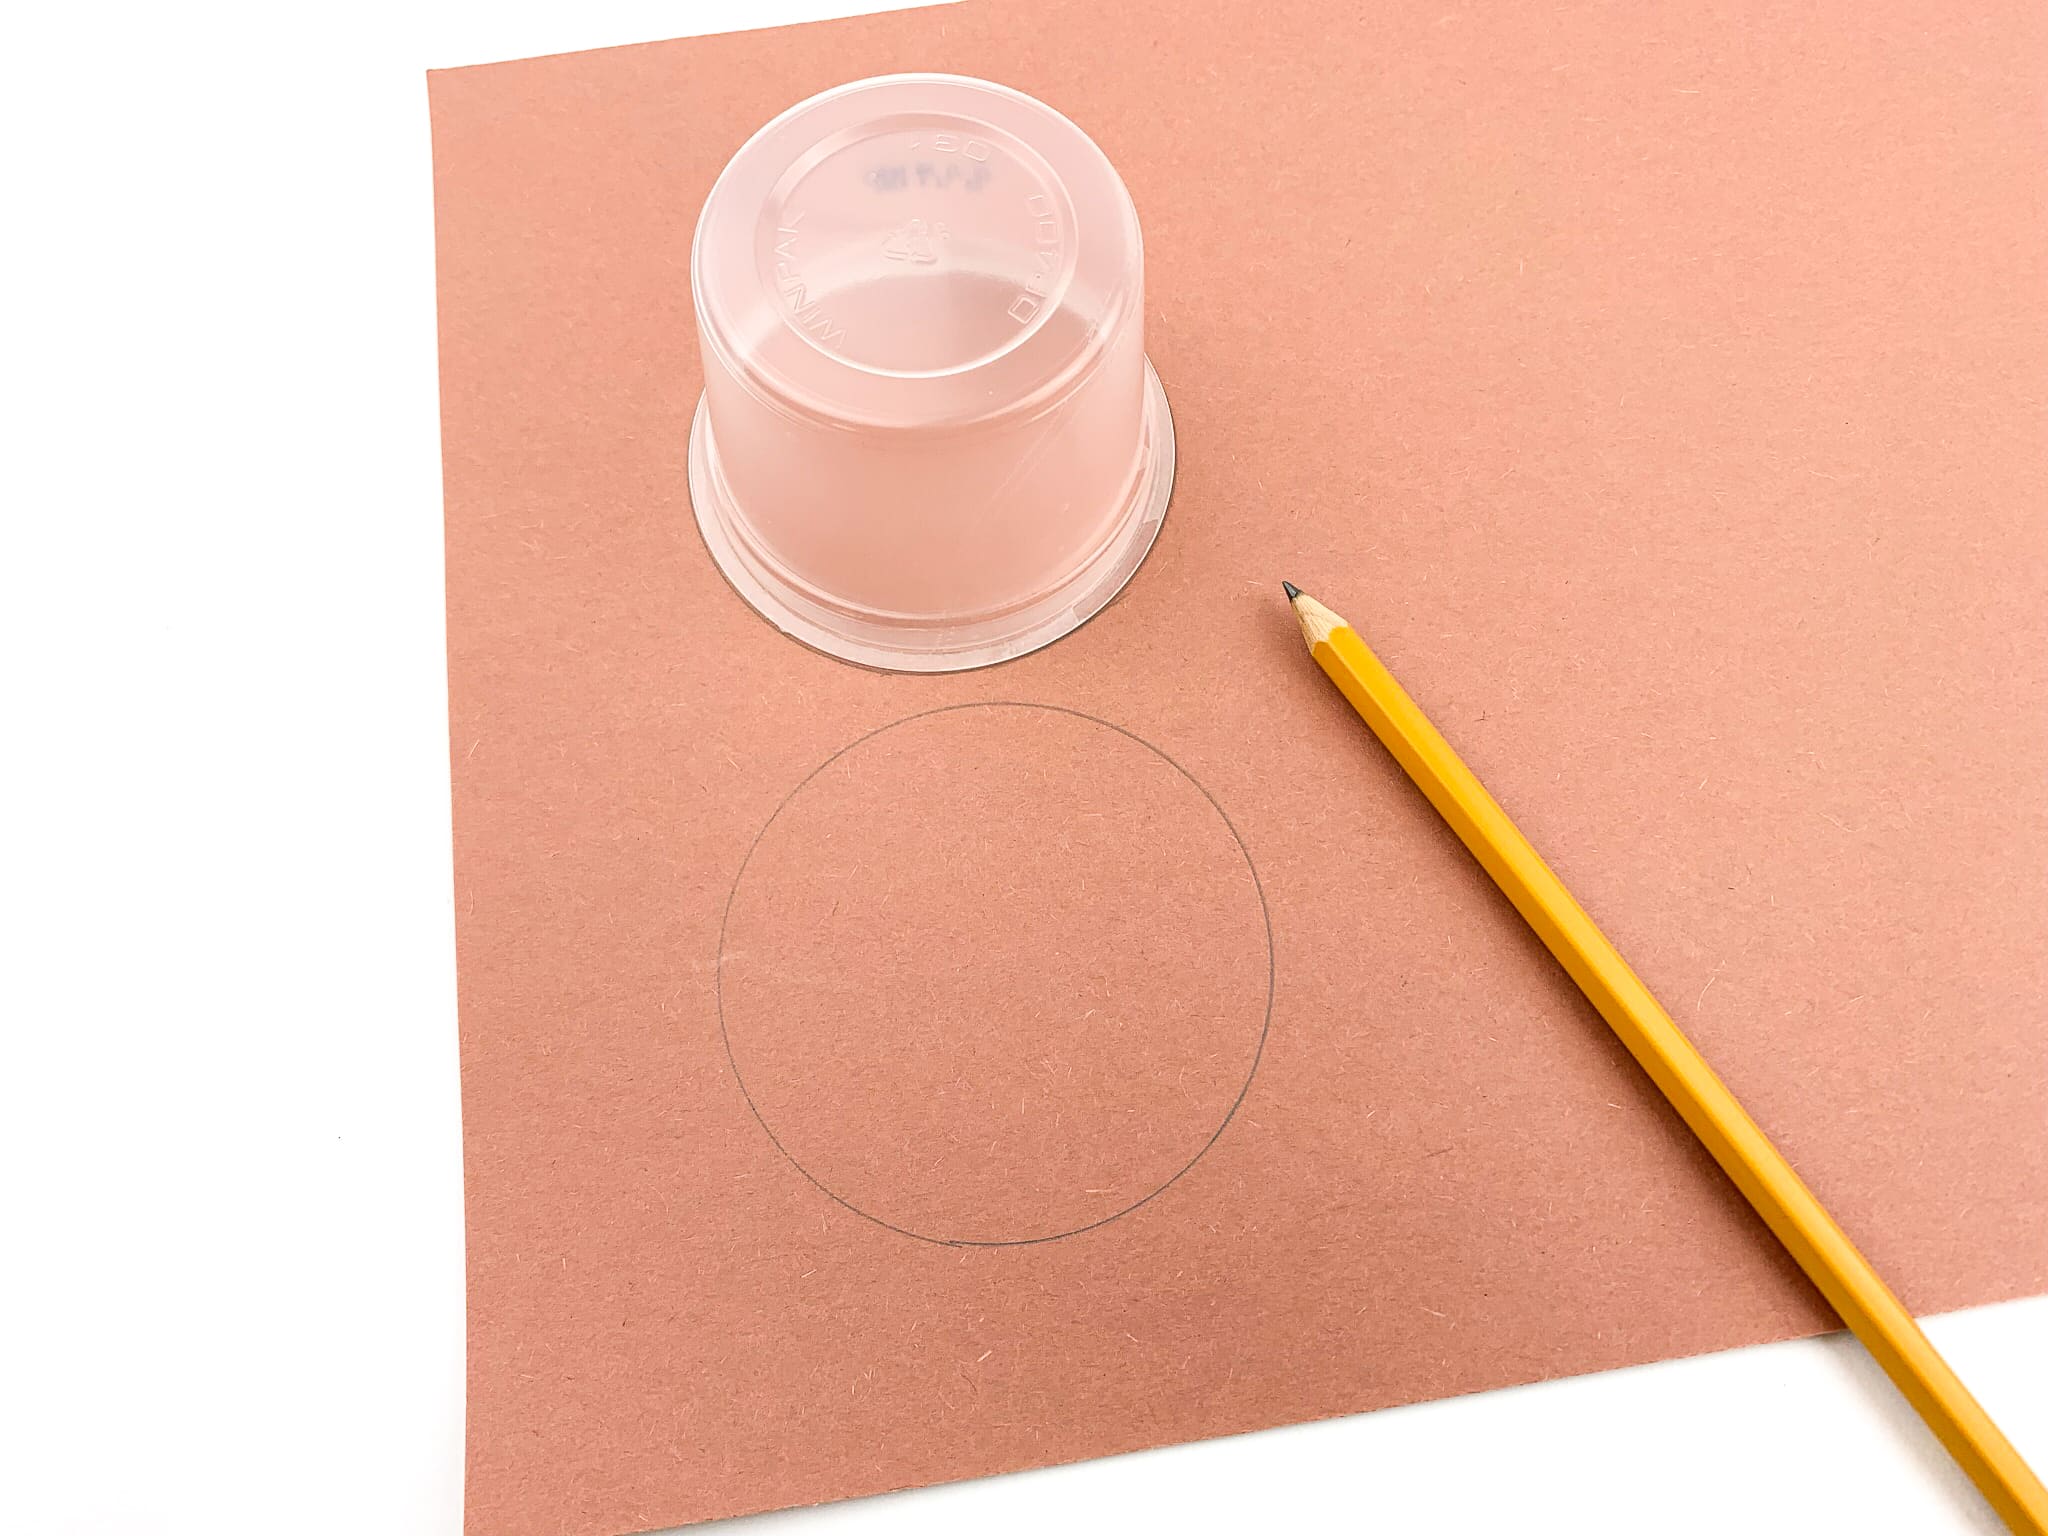 Using the bottom of the cup, trace out 3 circles.